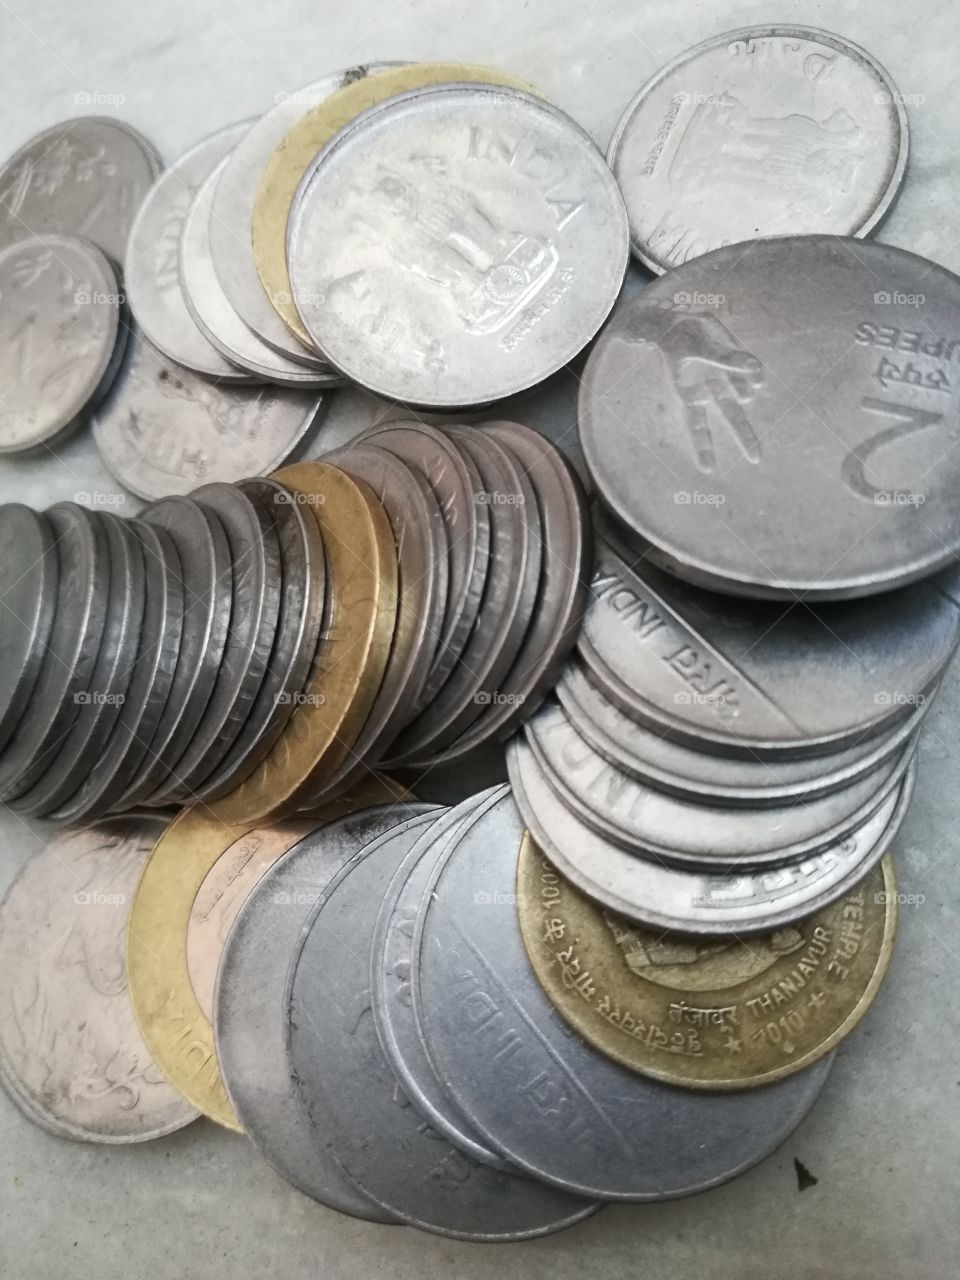 India coins